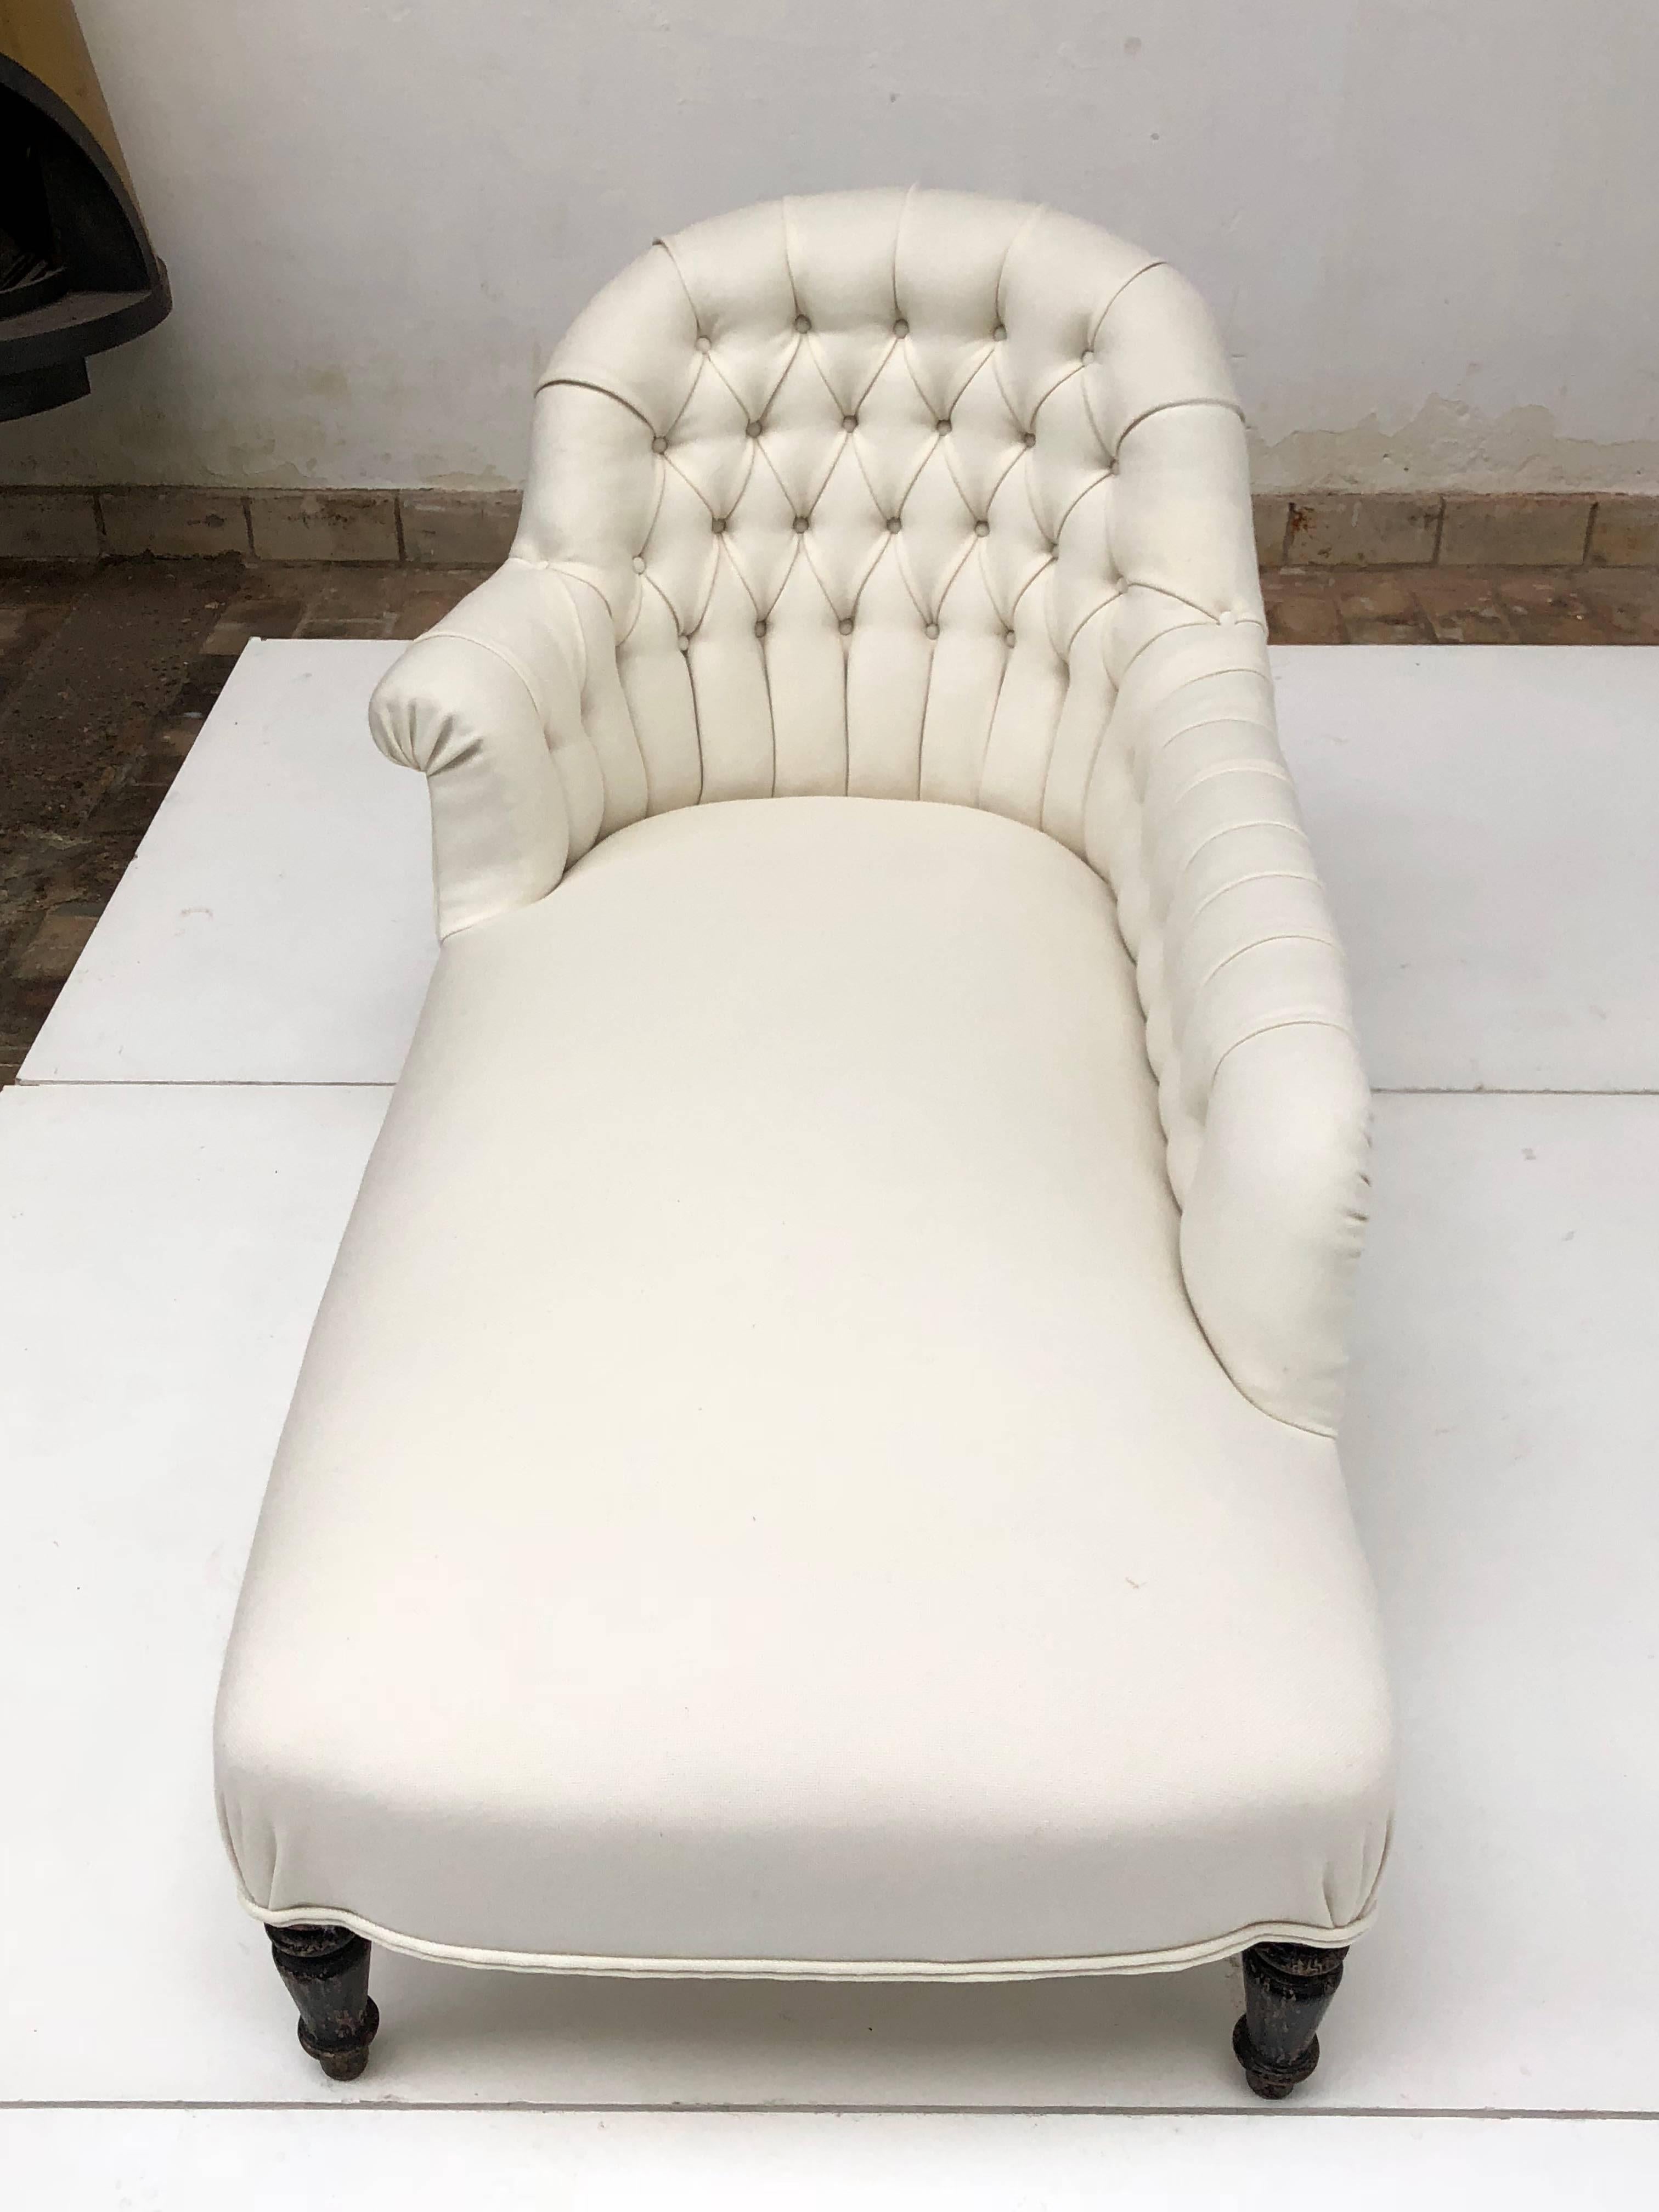 Napoleon III French Méridienne / Chaise Longue circa 1850 Re-Upholstered in De Ploeg Wool